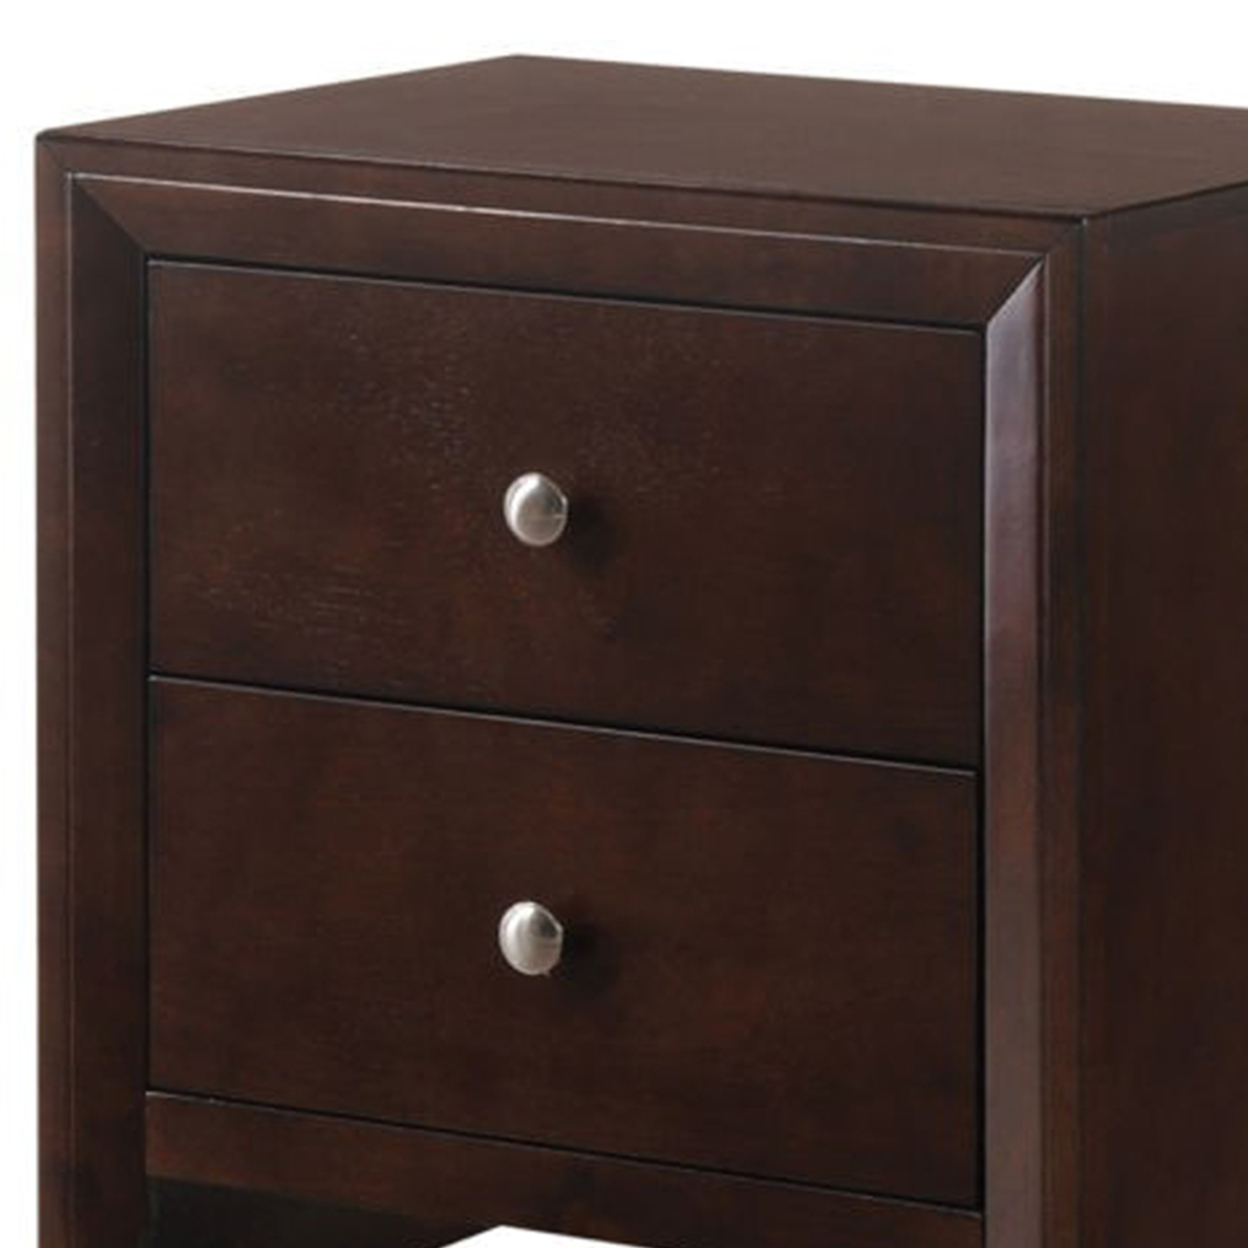 Grained Wooden Nightstand With 2 Drawers And Sled Base, Cherry Brown- Saltoro Sherpi